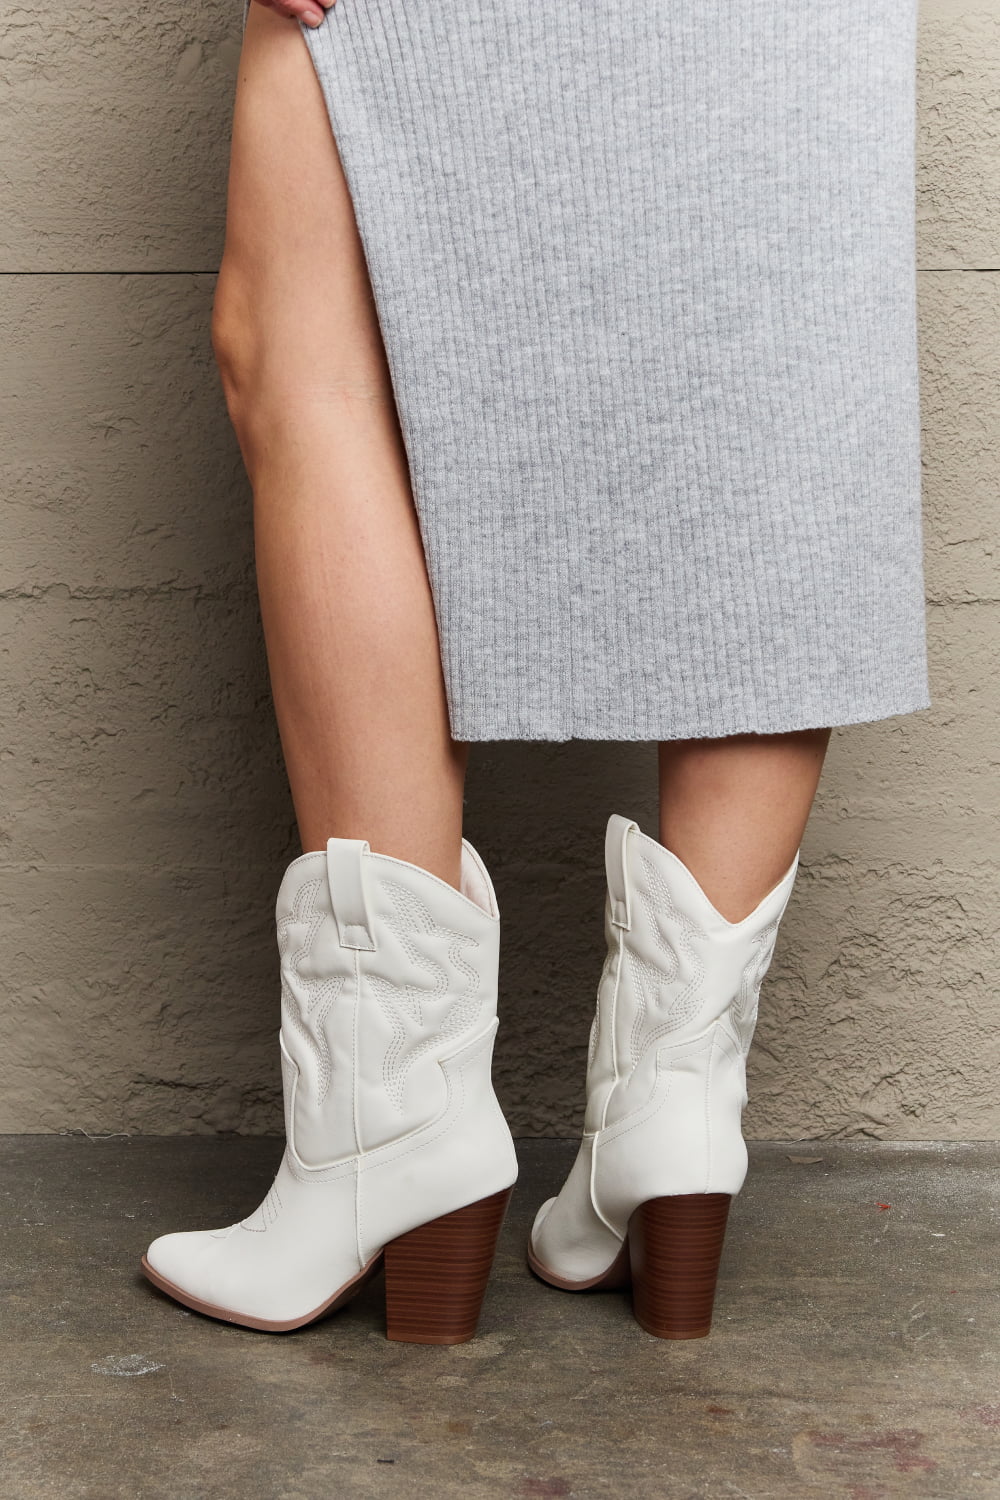 Bella White Cowboy Boots - Cheeky Chic Boutique